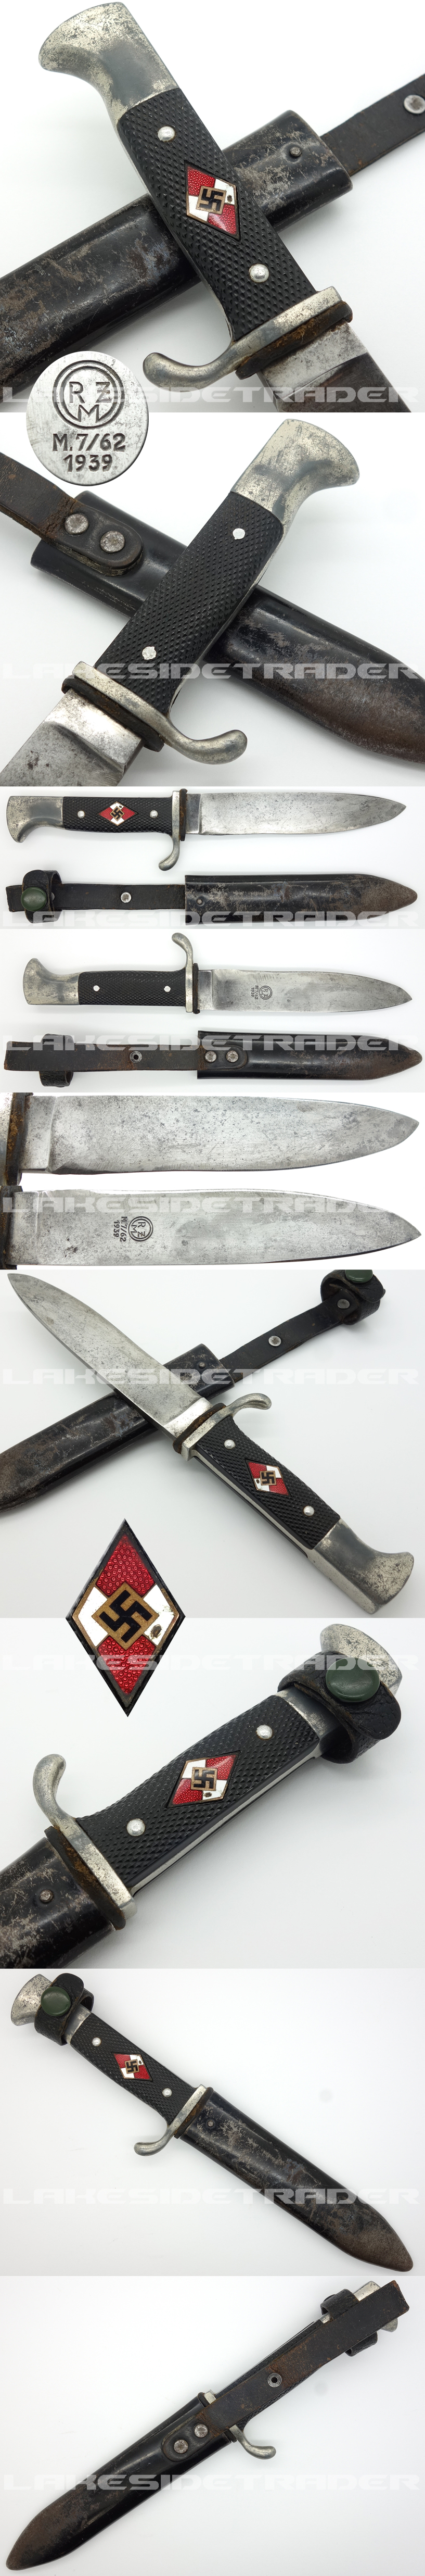 Hitler Youth Knife by RZM M7/62 1939